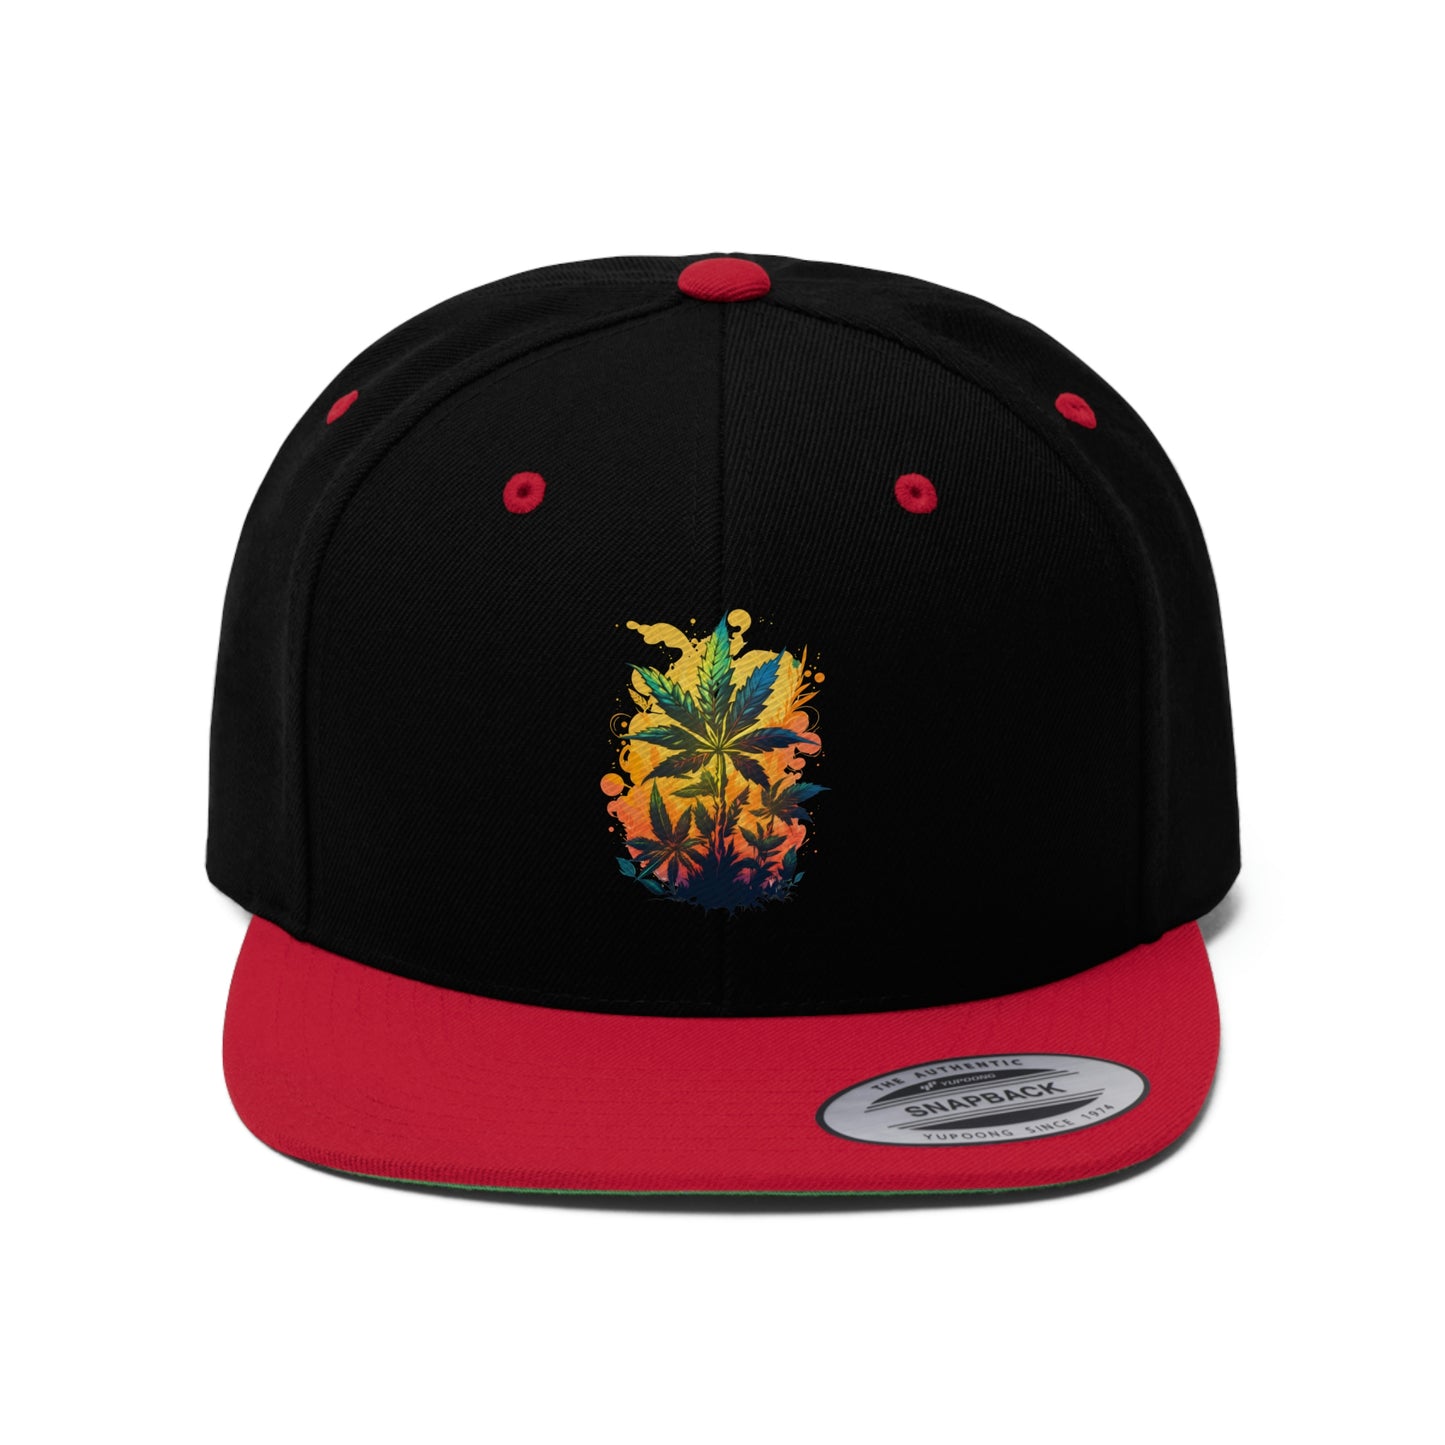 Warm Cannabis Paradise Snapback Hat with weed leaves on an orange and yellow background in the red and black color way